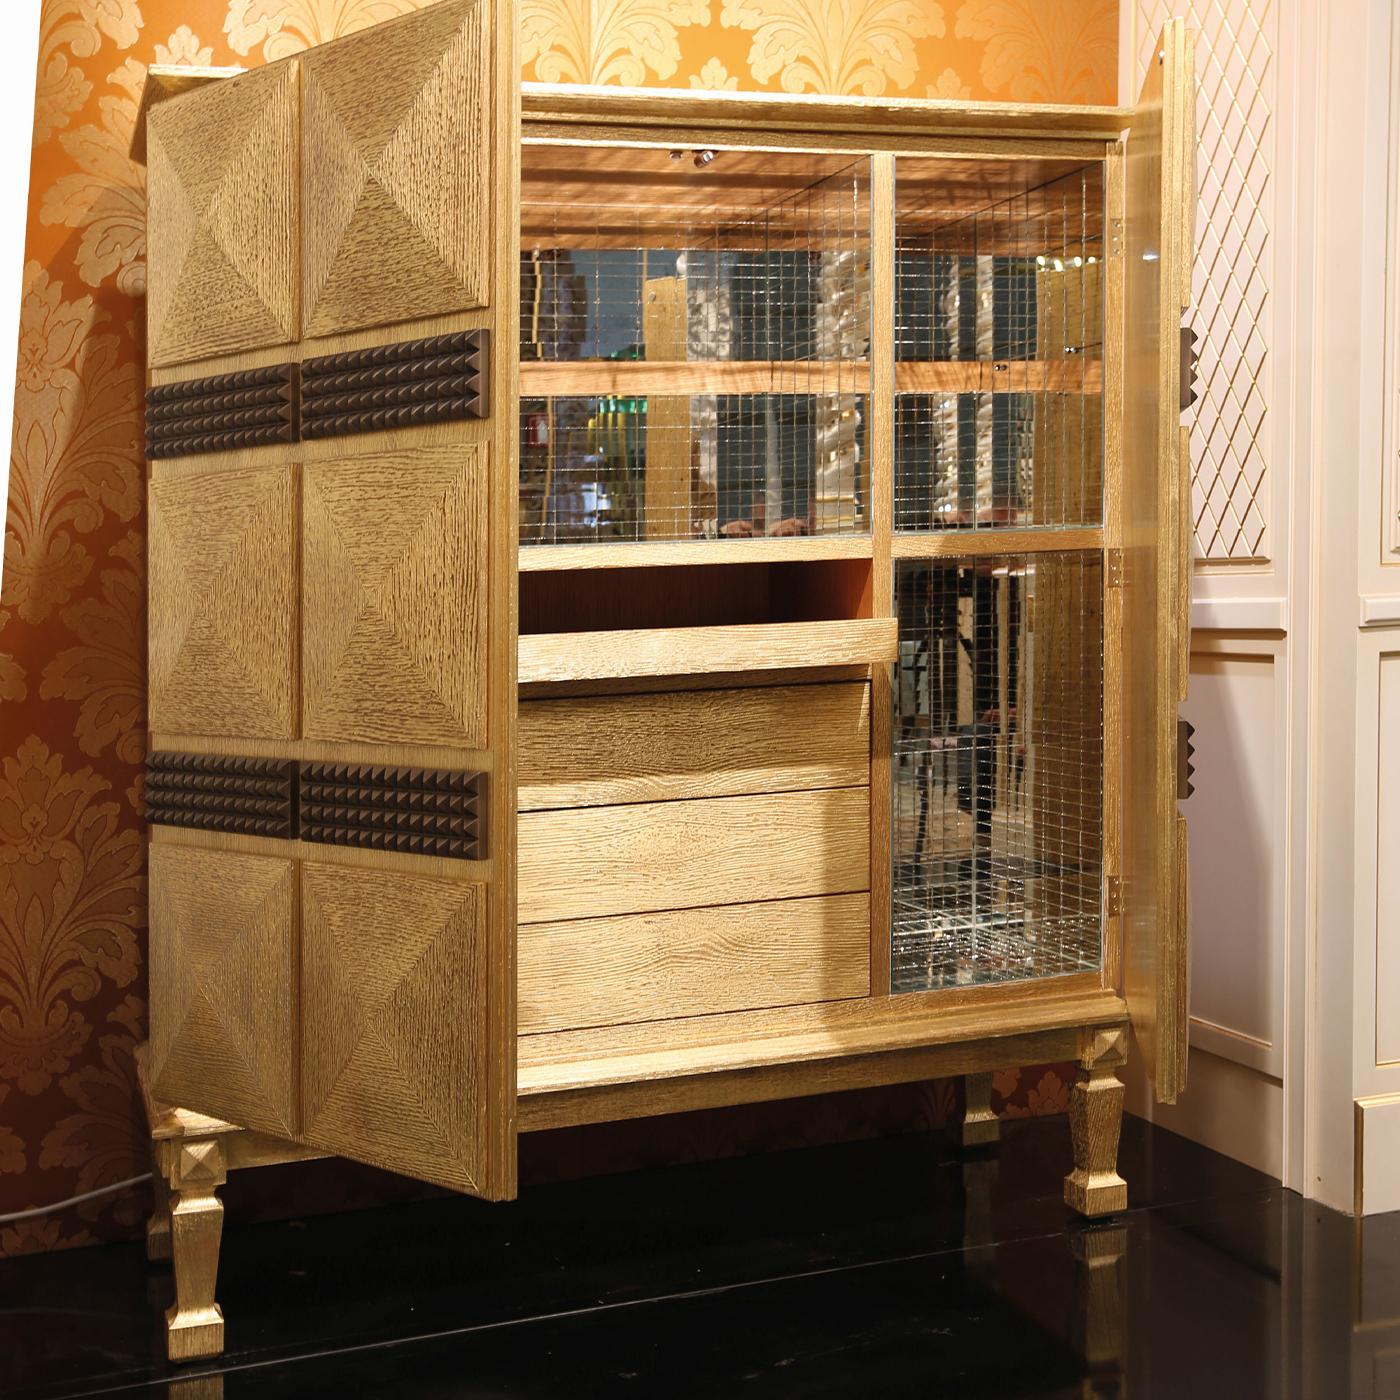 Stately and sultry, this bar cabinet will effortlessly fit in a sophisticated, Art Deco-inspired living room. The imposing structure standing on four sculpted feet is fashioned of pickled oak and extensively covered with prized gold leaf for a luxe